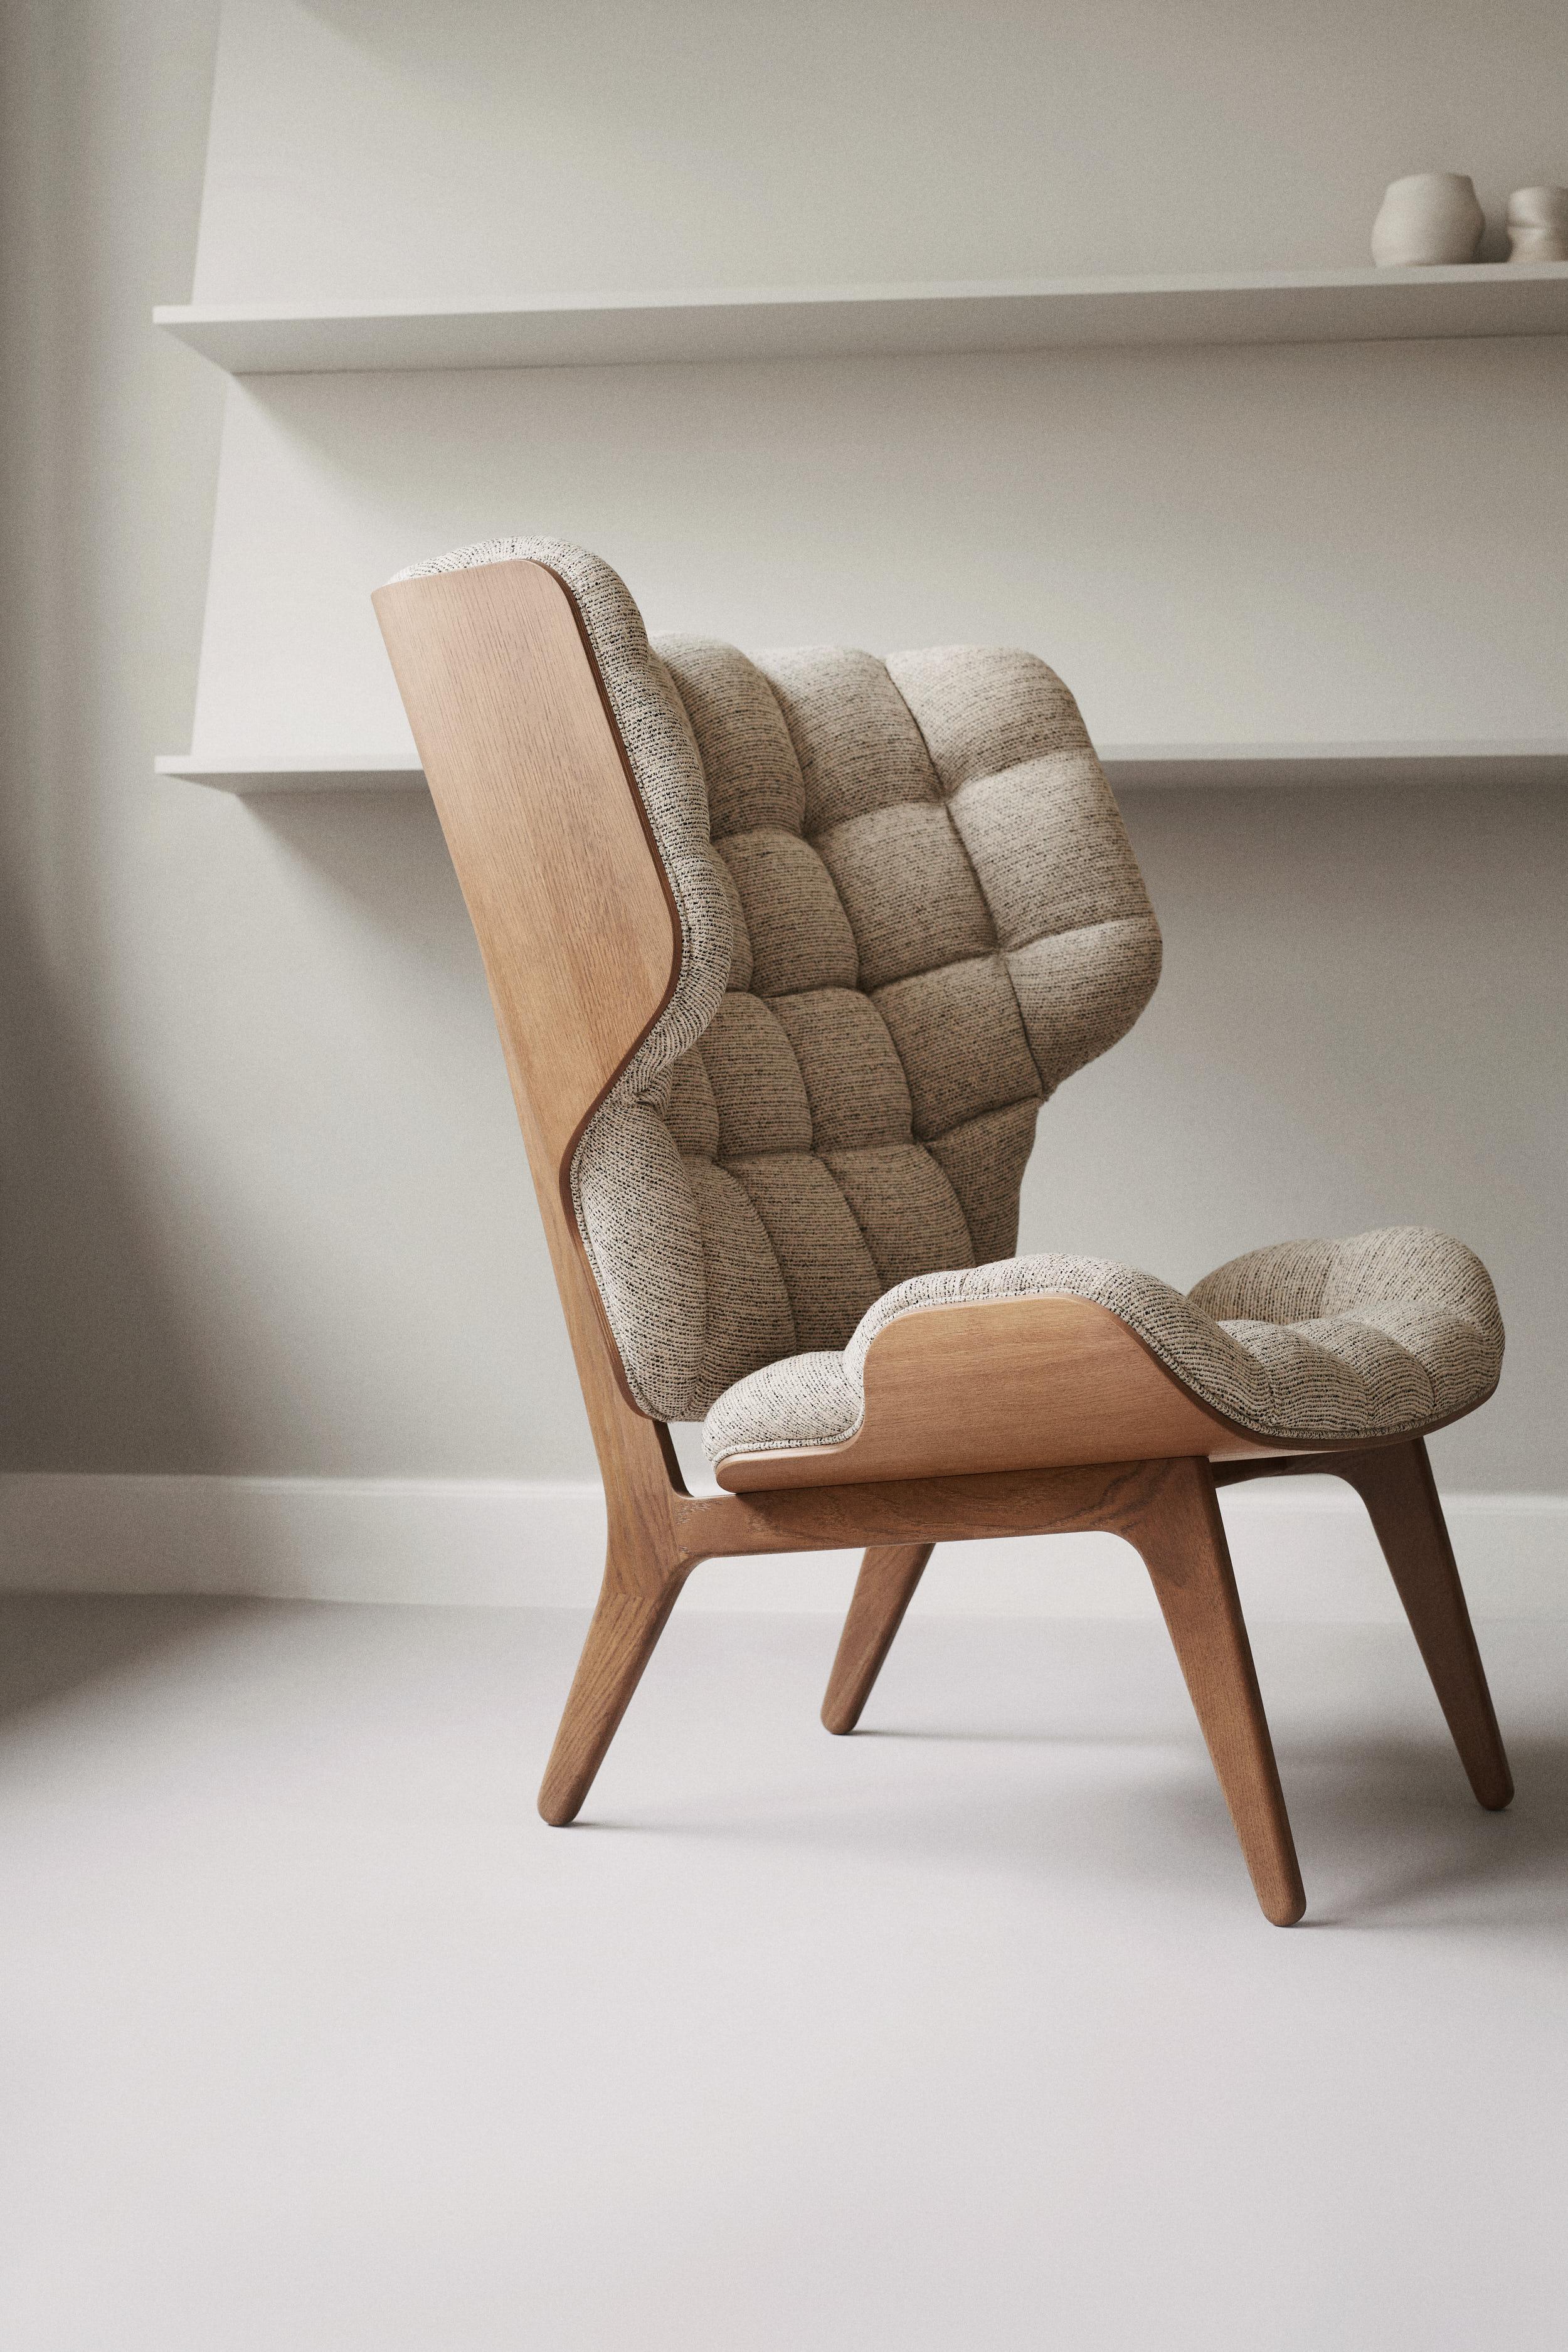 Mammoth Lounge Chair by NORR11
Dimensions: D 87 x W 89 x H 104 cm. SH 35,5 cm. 
Materials: Natural oak and upholstery.
Upholstery: Hallingdal 65 220.

Available in different oak finishes: Natural oak, light smoked oak, dark smoked oak, black oak.